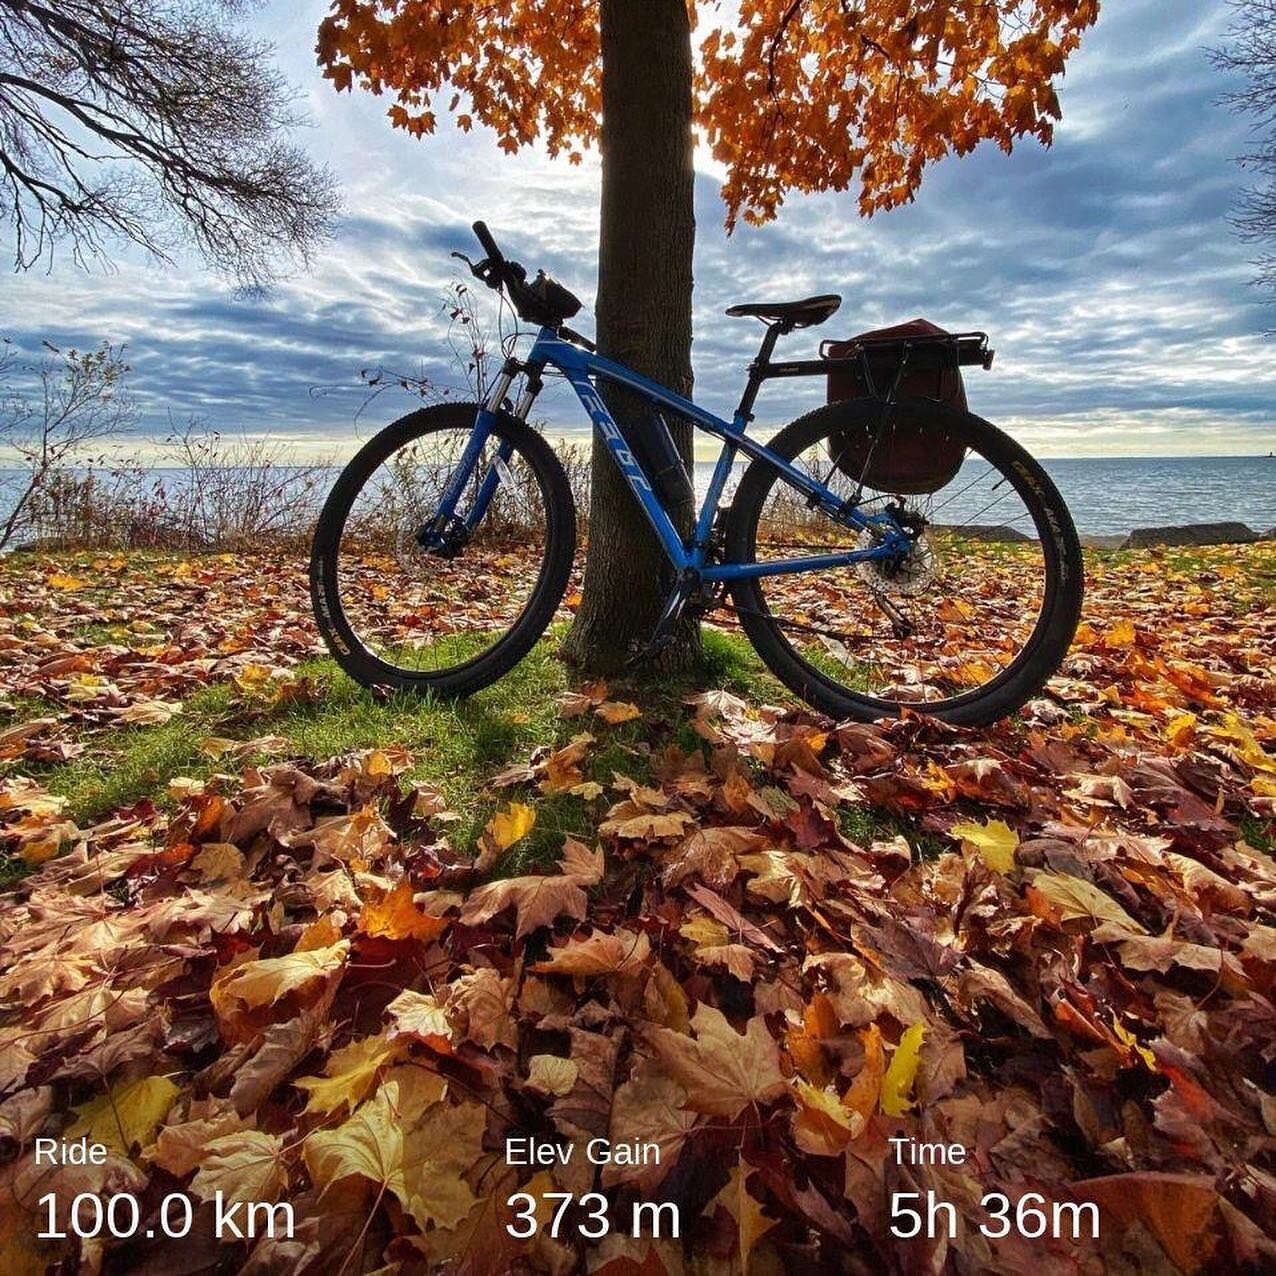 November Gran Fondo ride done (100 km)! Saw a young buck on the Waterfront Trail. It&rsquo;s t-shirt and shorts weather here. 

Forgot to take my monthly asthma meds until 80km into the ride. Whoops. 

I missed a couple of monthly Gran Fondo challeng